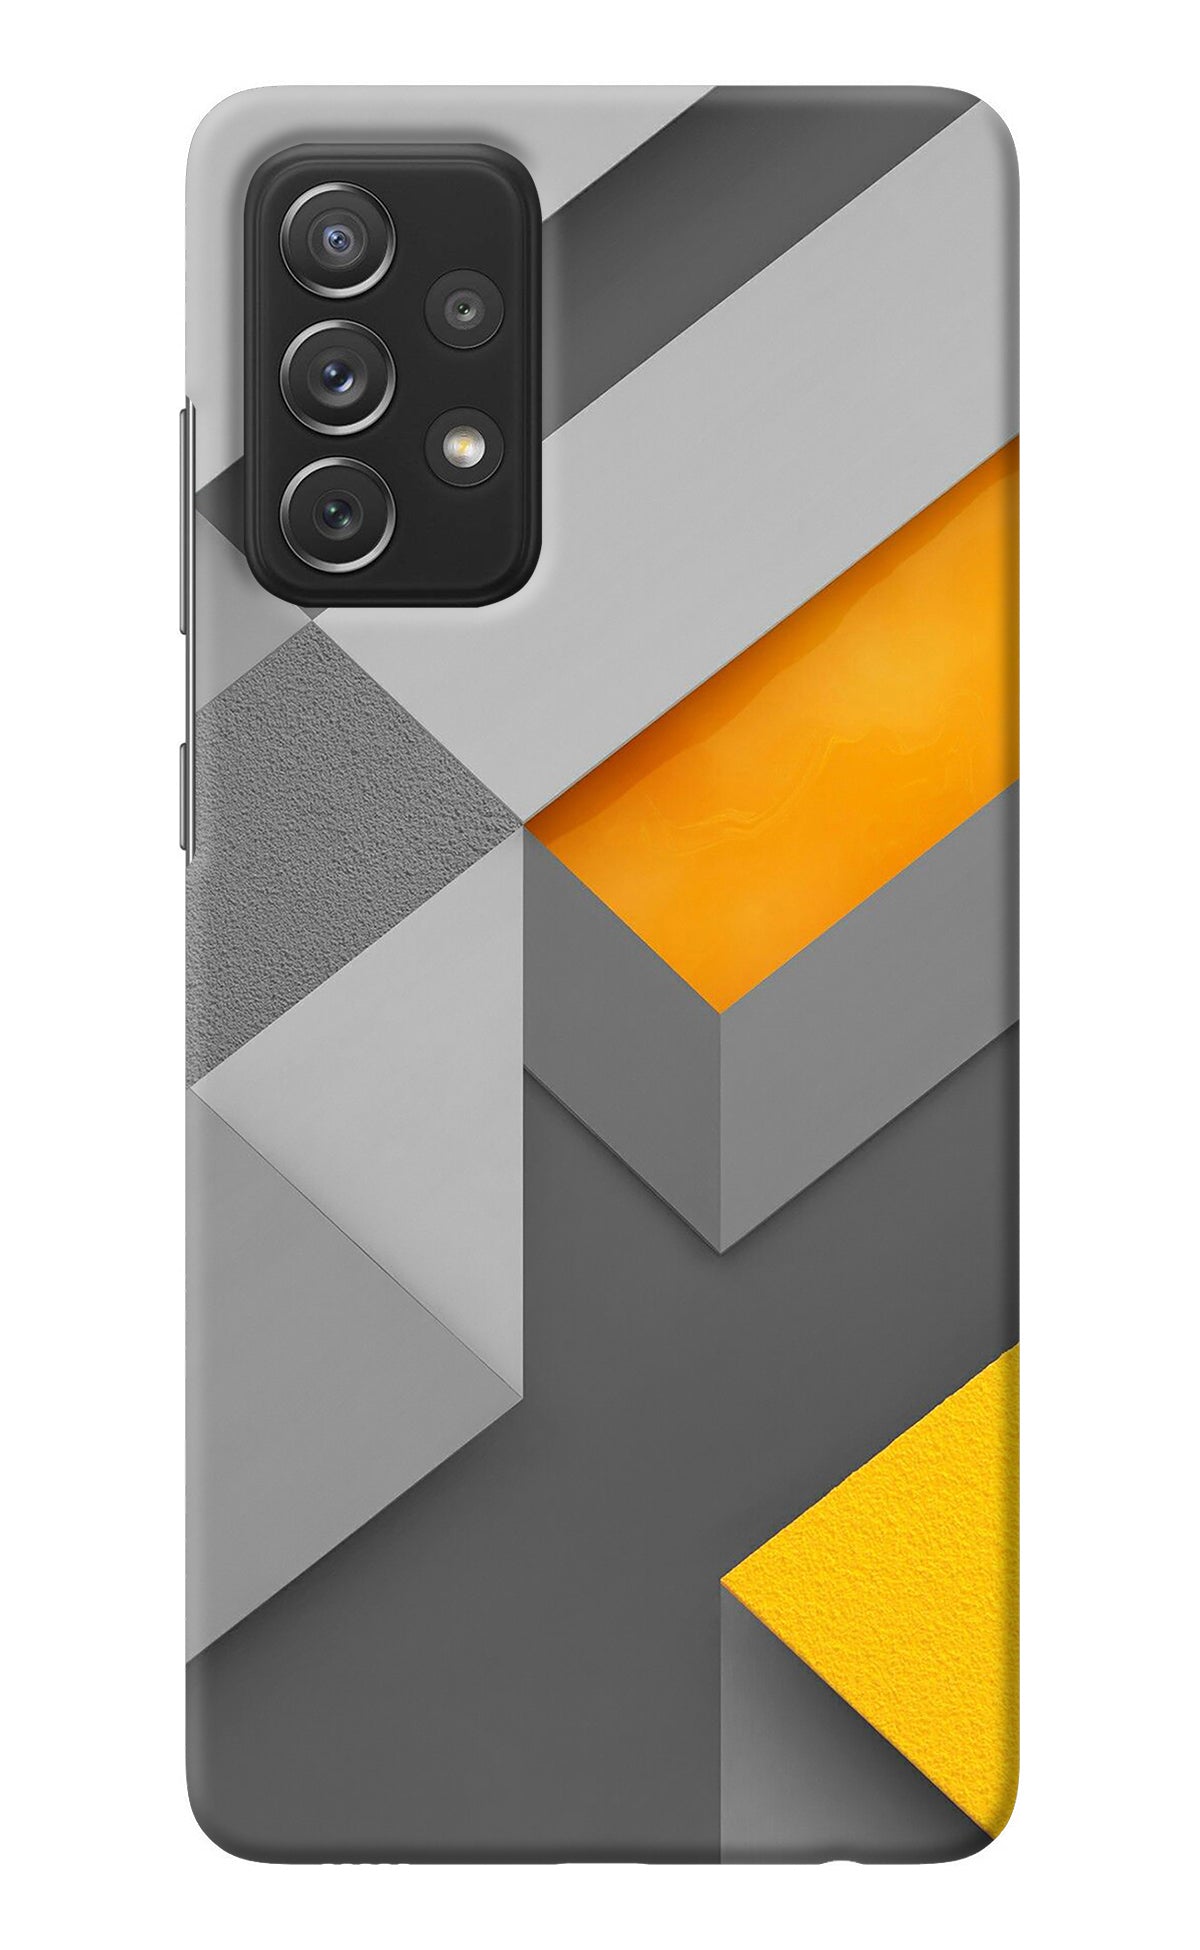 Abstract Samsung A72 Back Cover